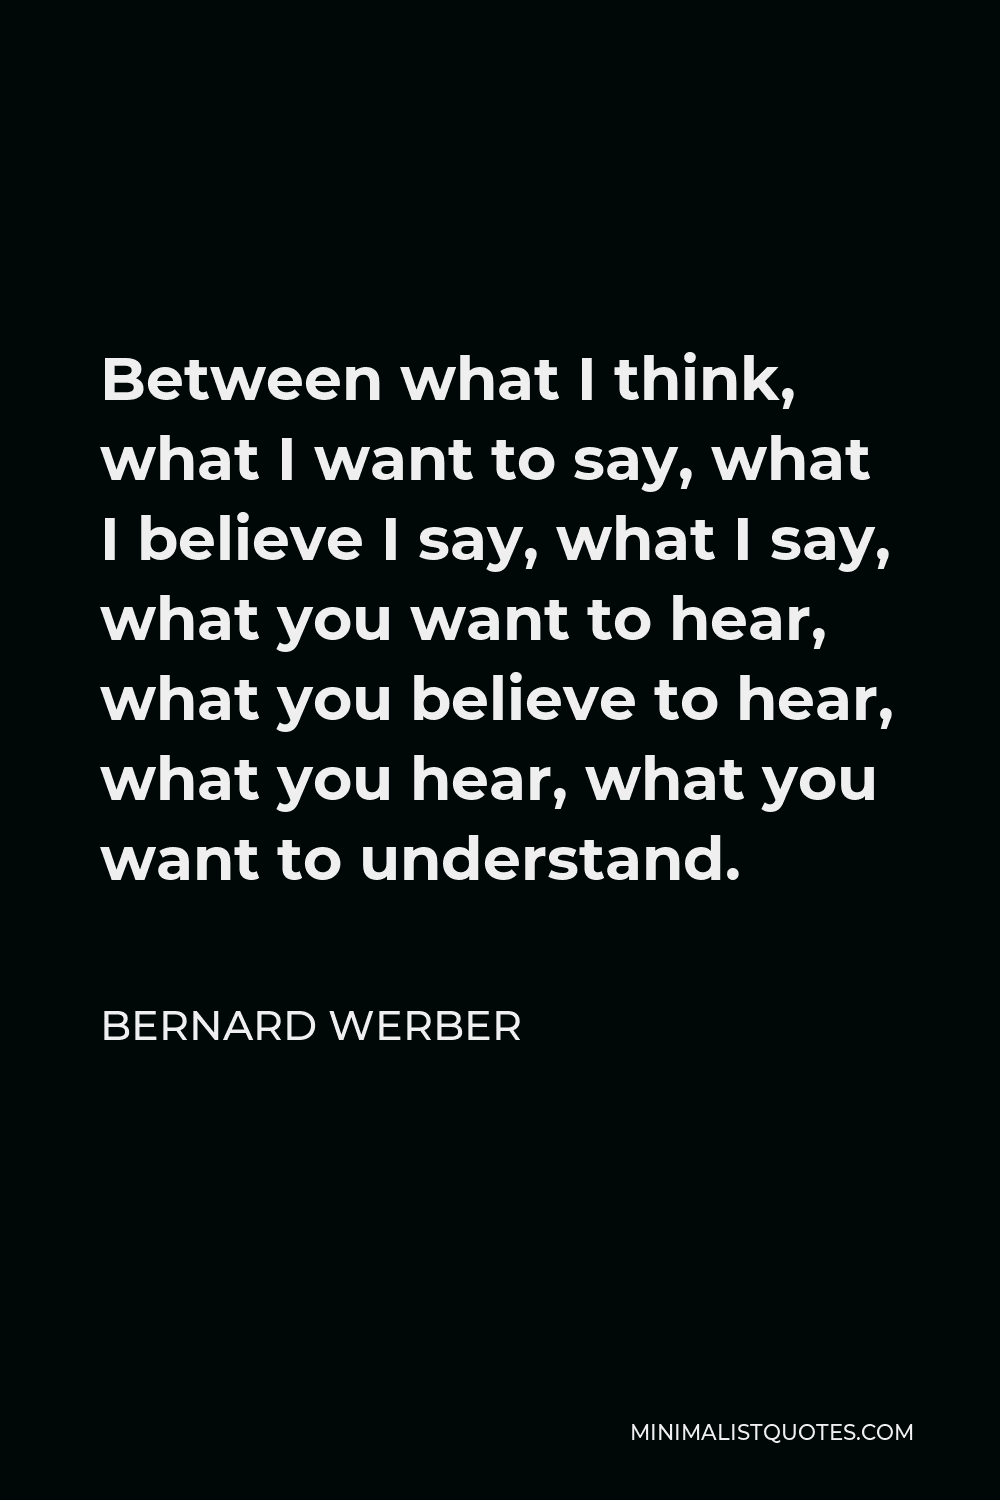 Bernard Werber Quote - Between what I think, what I want to say, what I believe I say, what I say, what you want to hear, what you believe to hear, what you hear, what you want to understand.